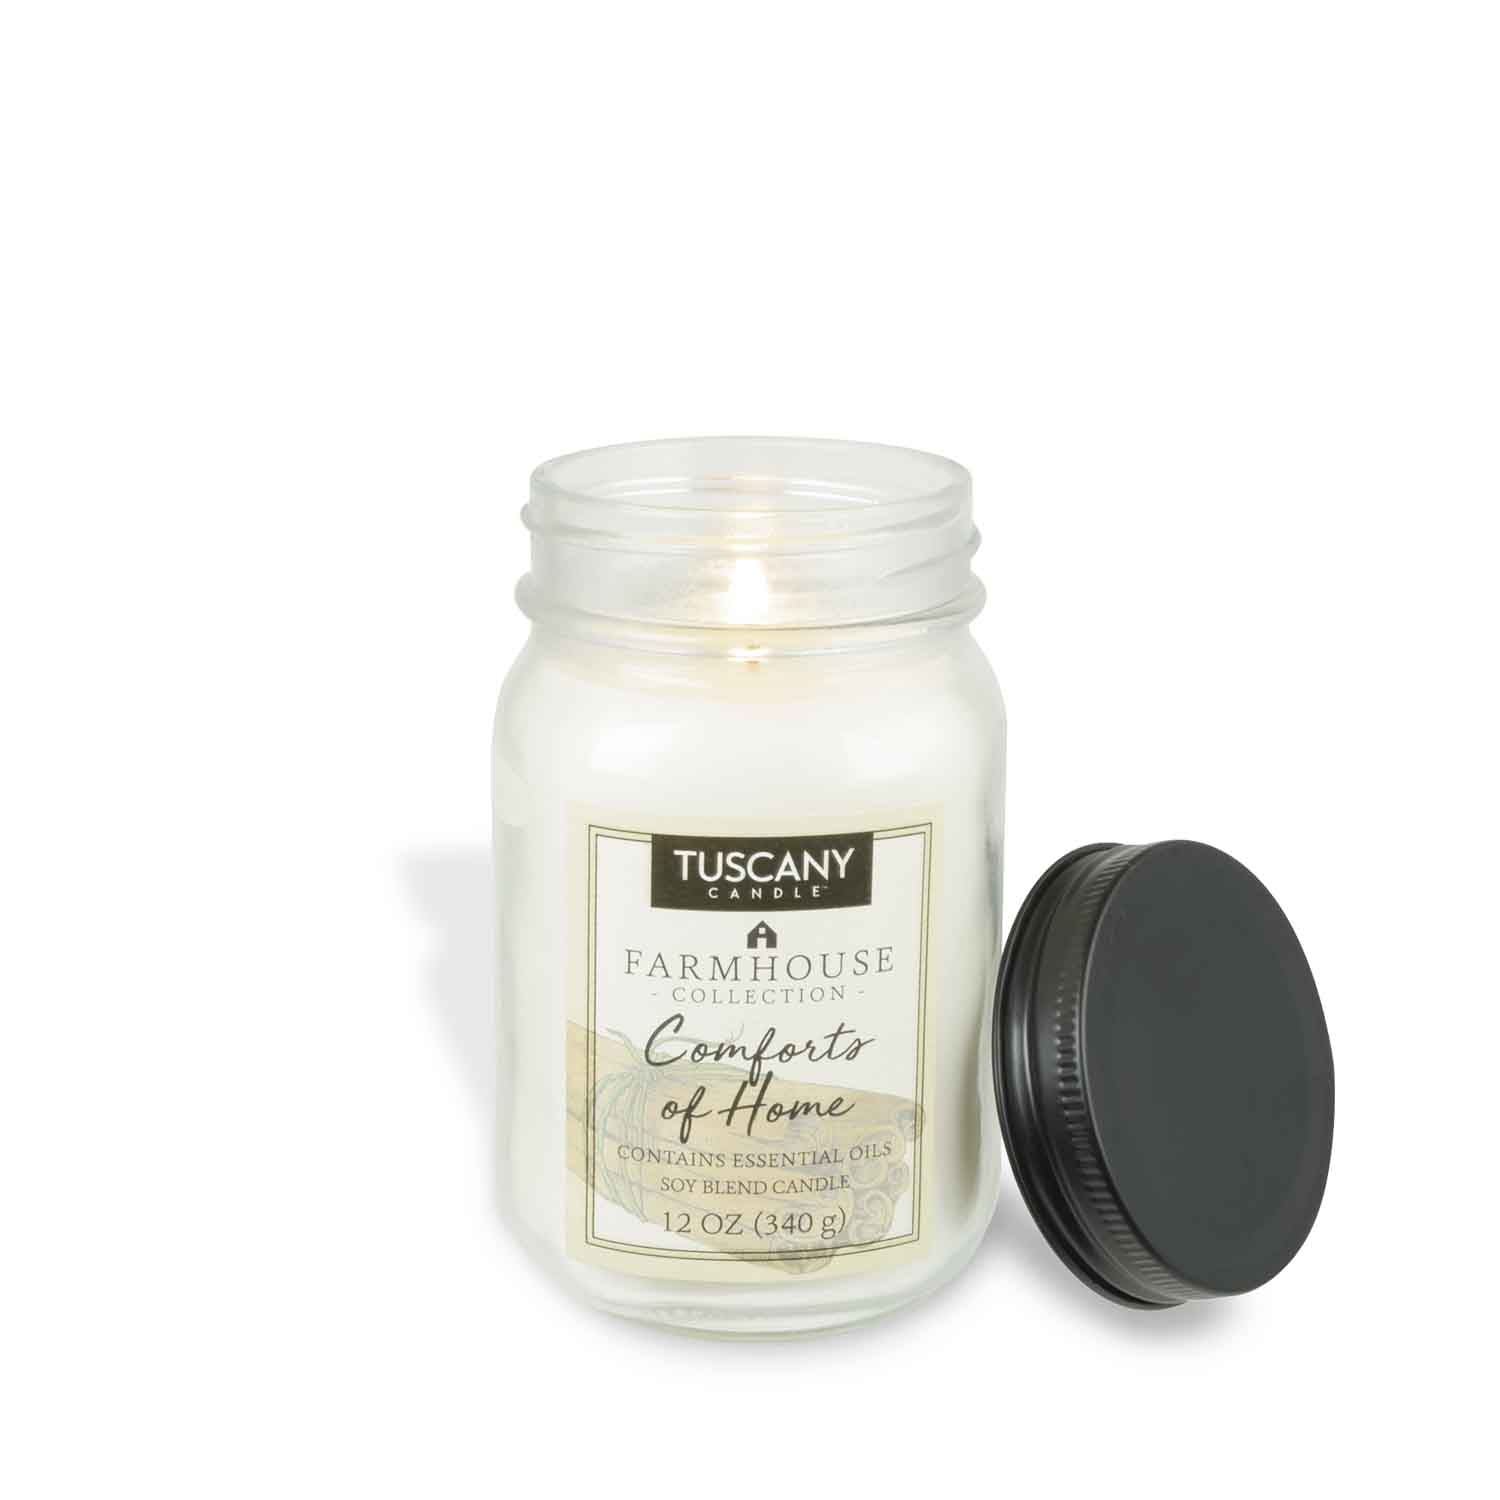 A white Tuscany Candle jar with a black lid containing Cinnamon.